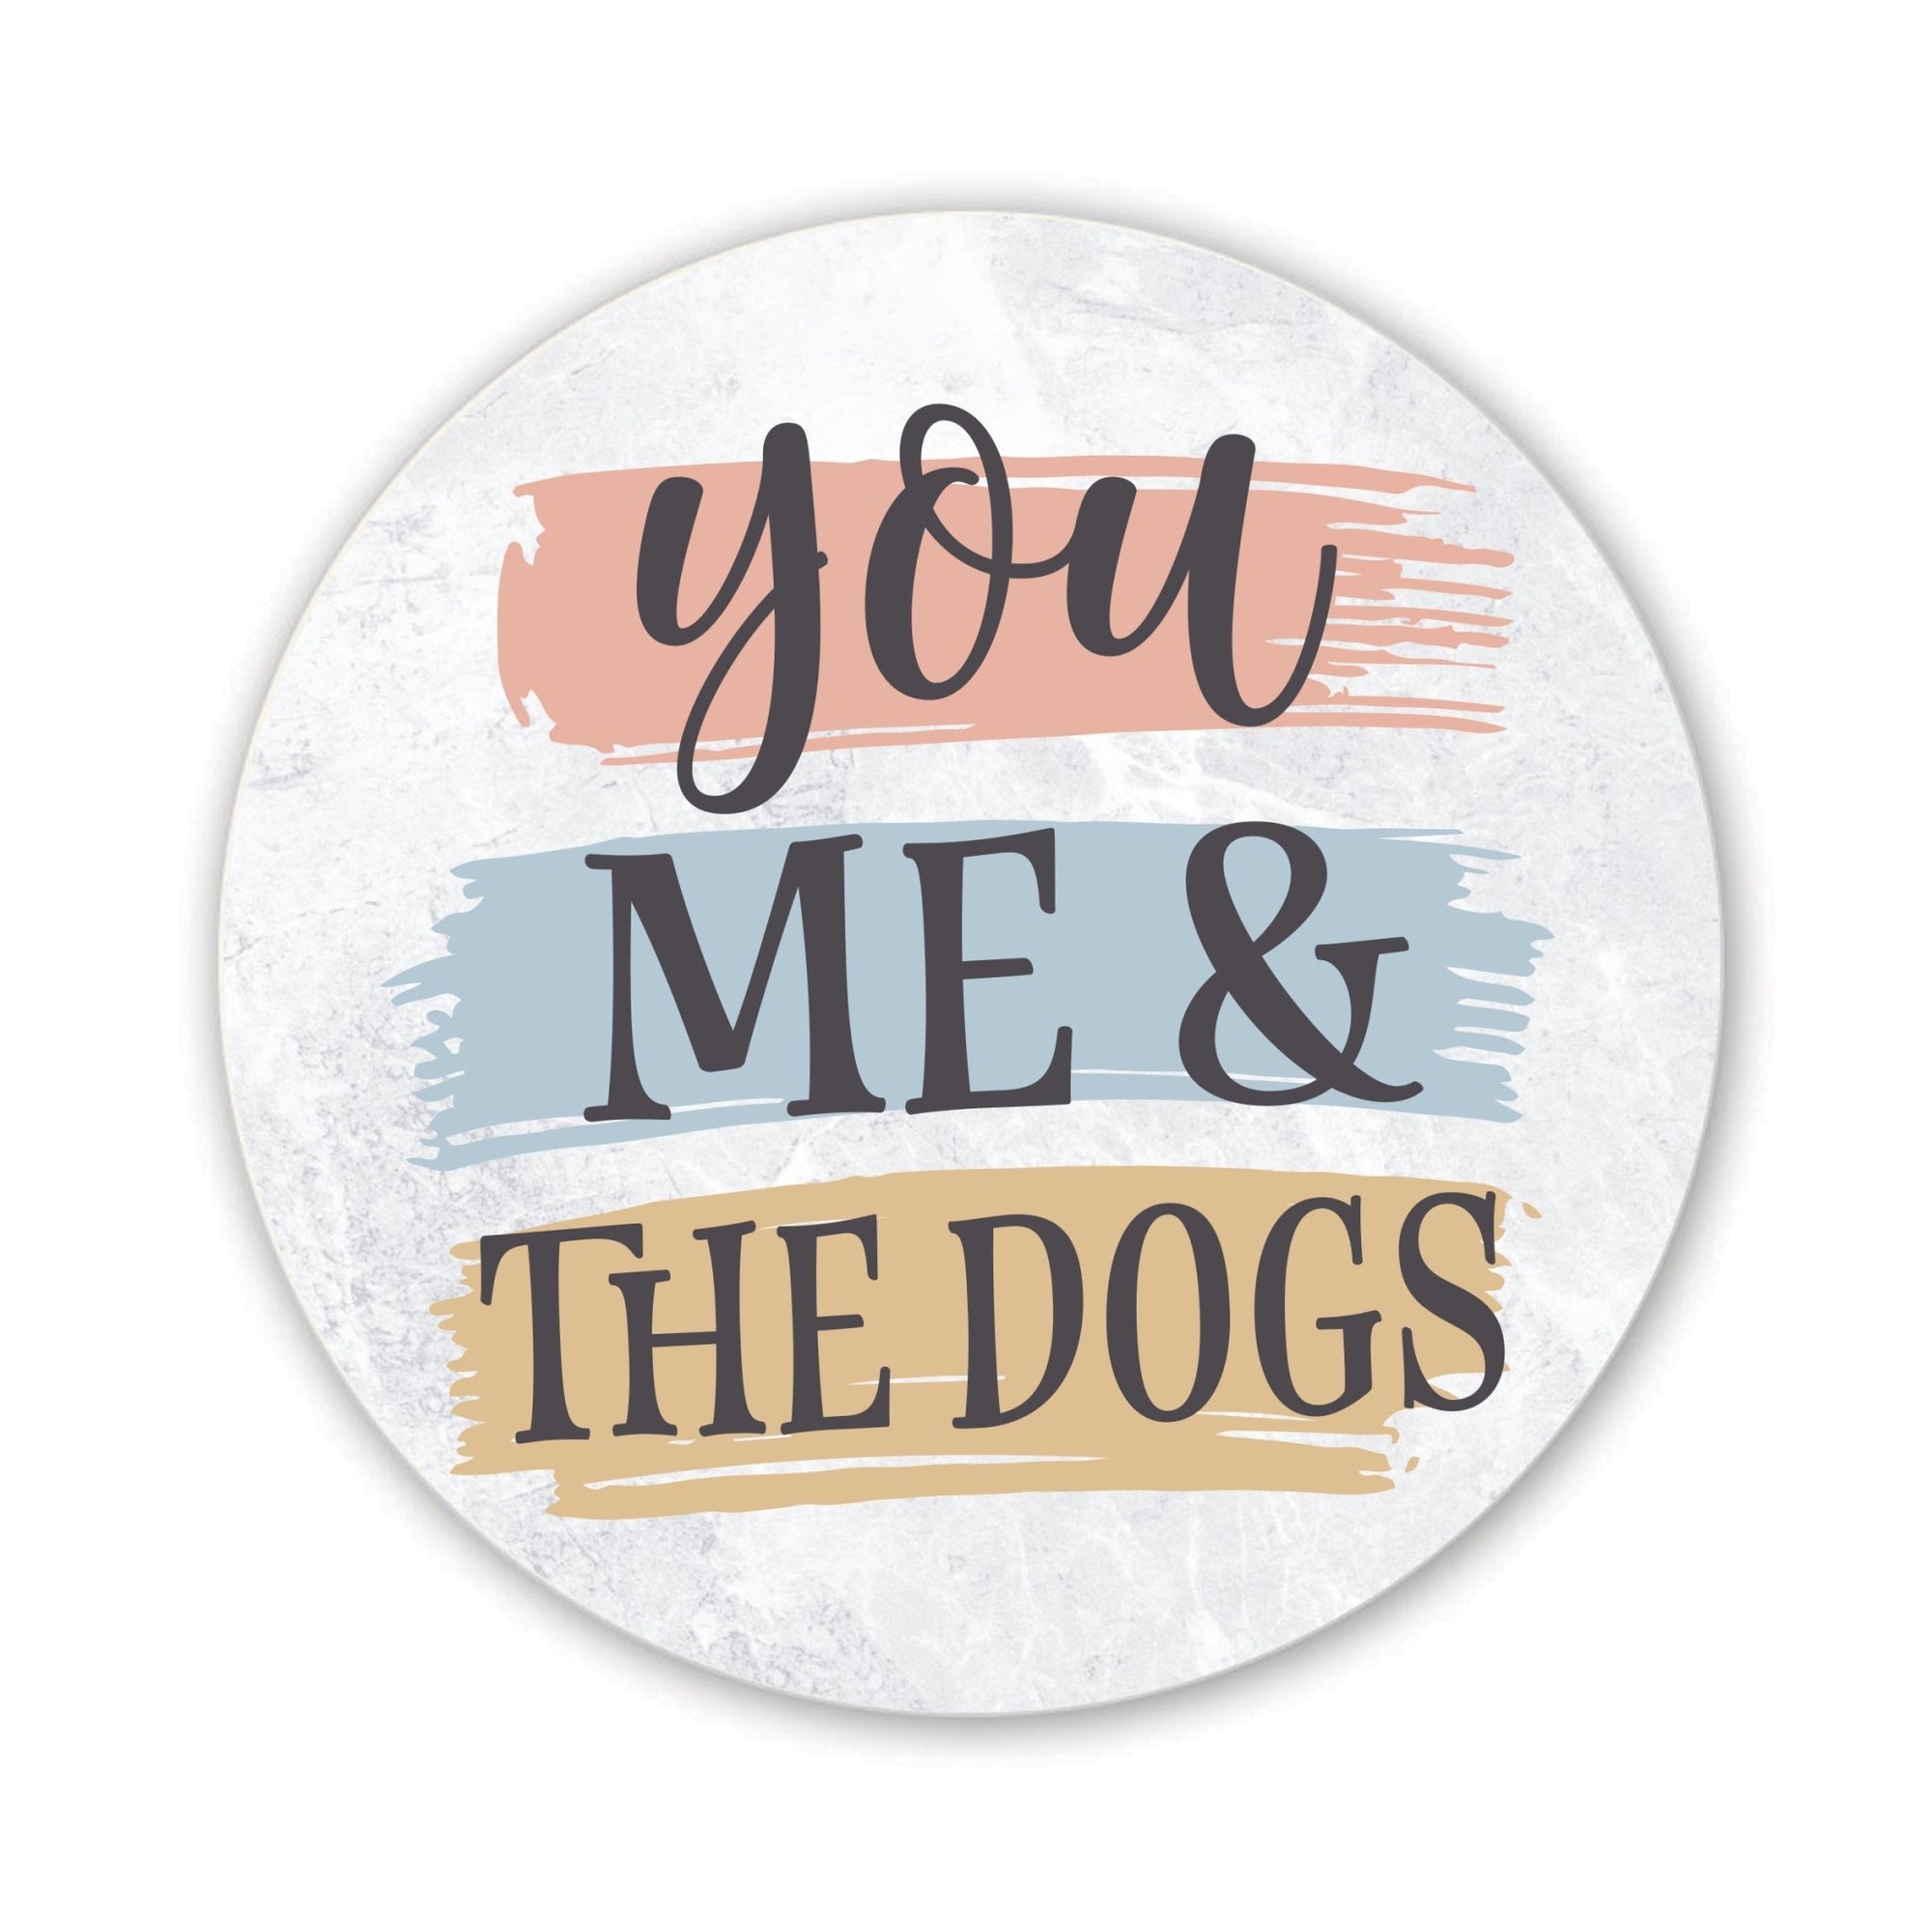 Refrigerator Magnet Perfect Gift Idea For Pet Owners - You Me & The Dogs - LifeSong Milestones